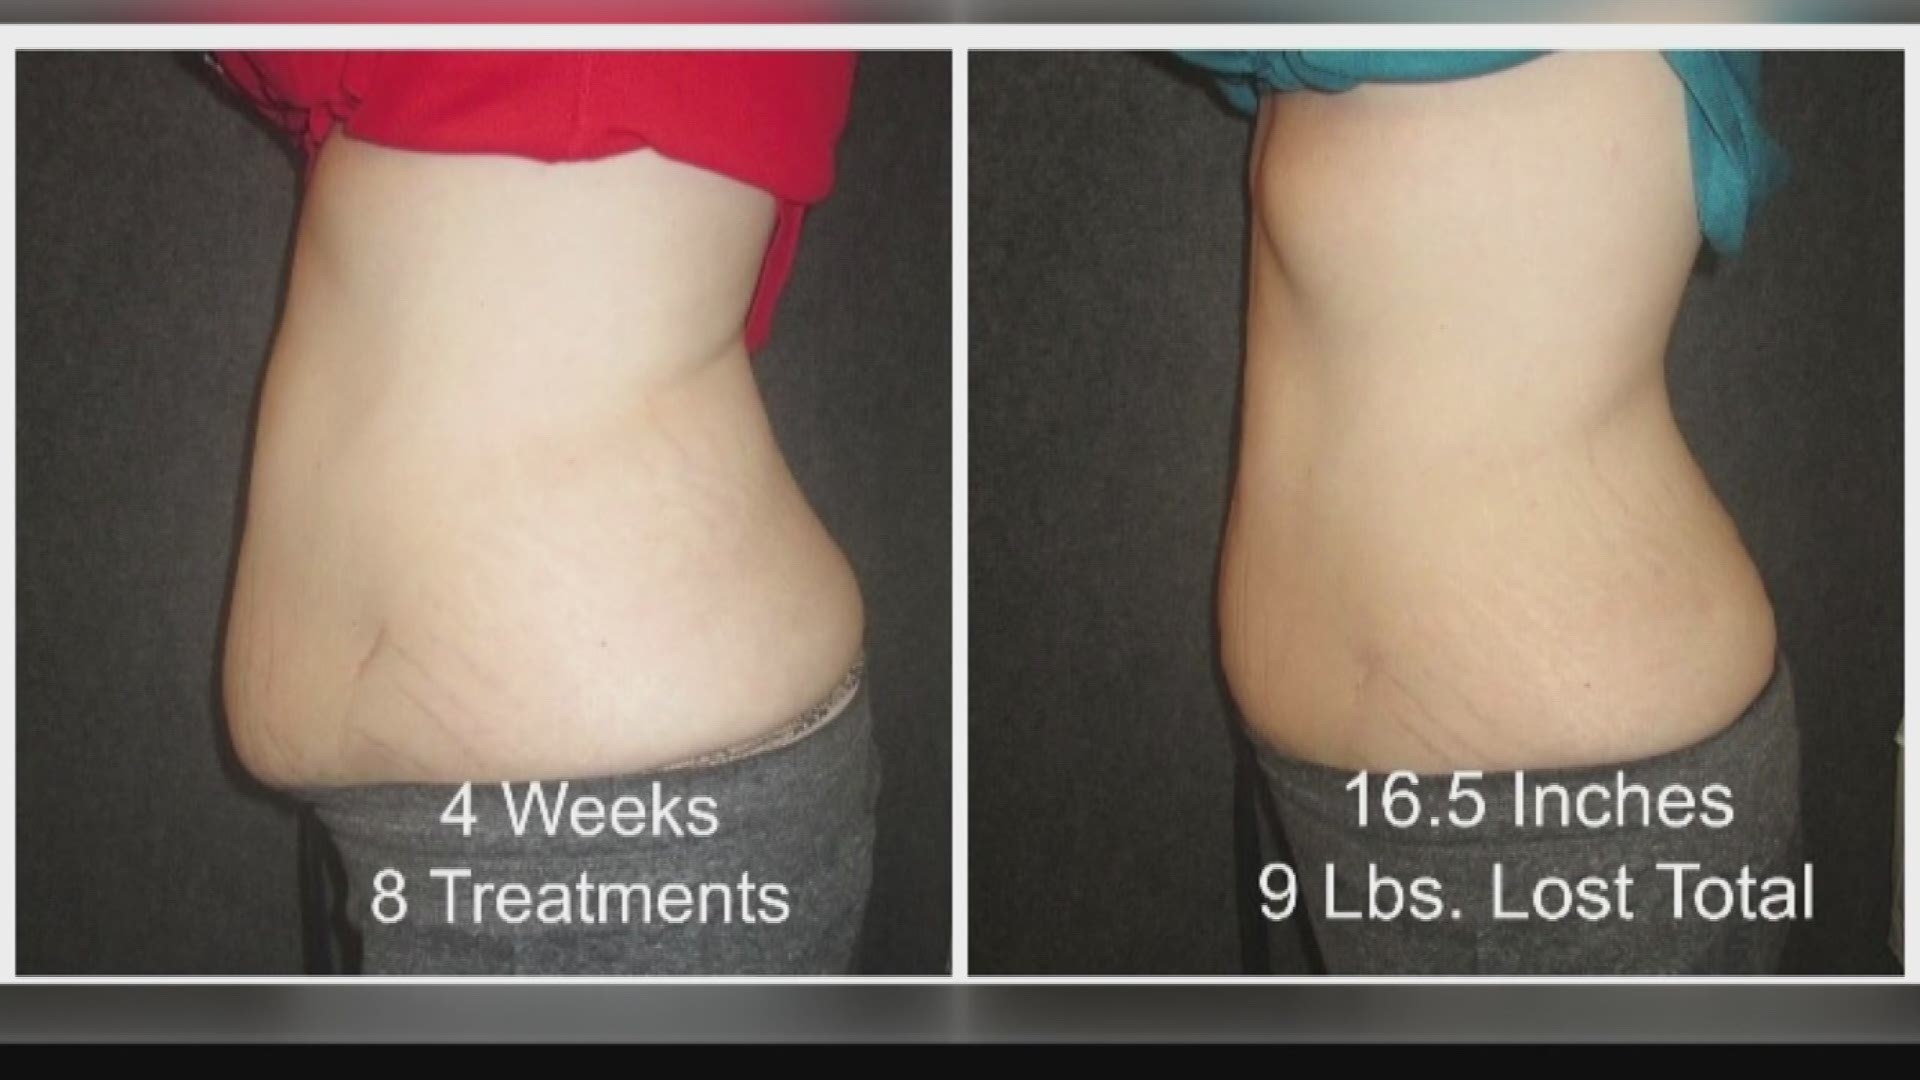 Lose inches on your waist in minutes with the help of i-Lipo (FCL